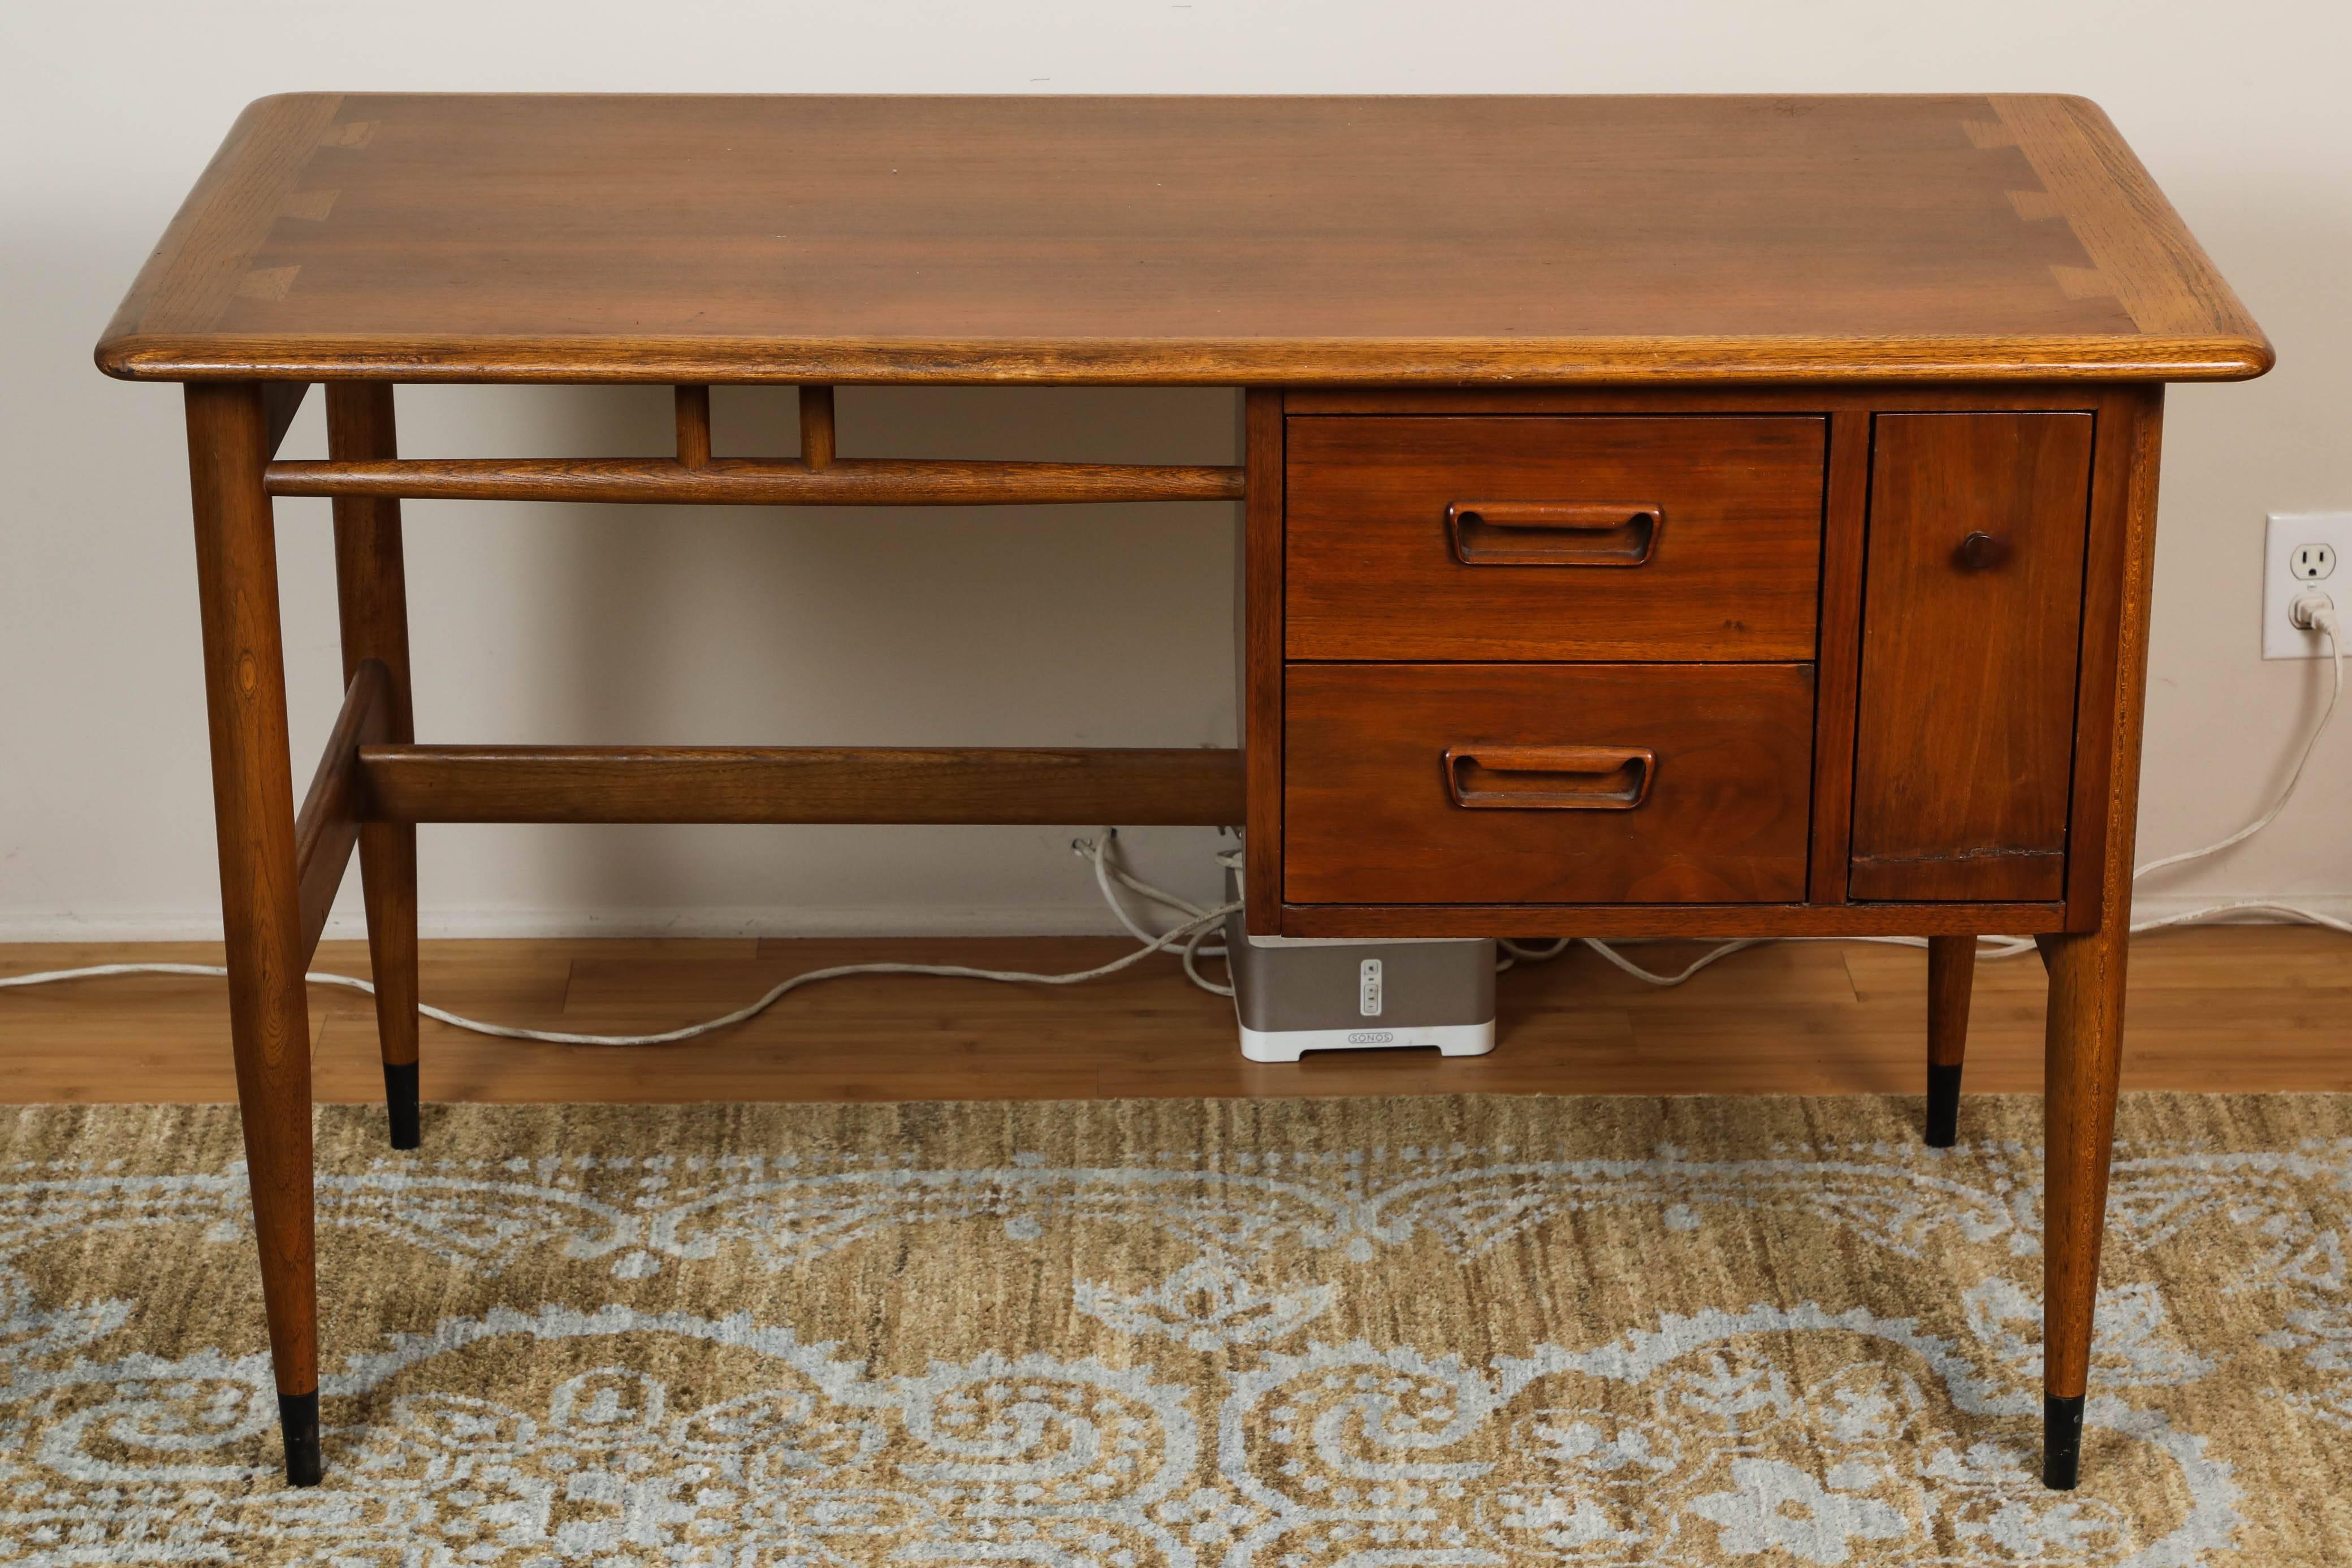 Beautifully appointed desk, two drawers with additional side compartment with Thonet chair.